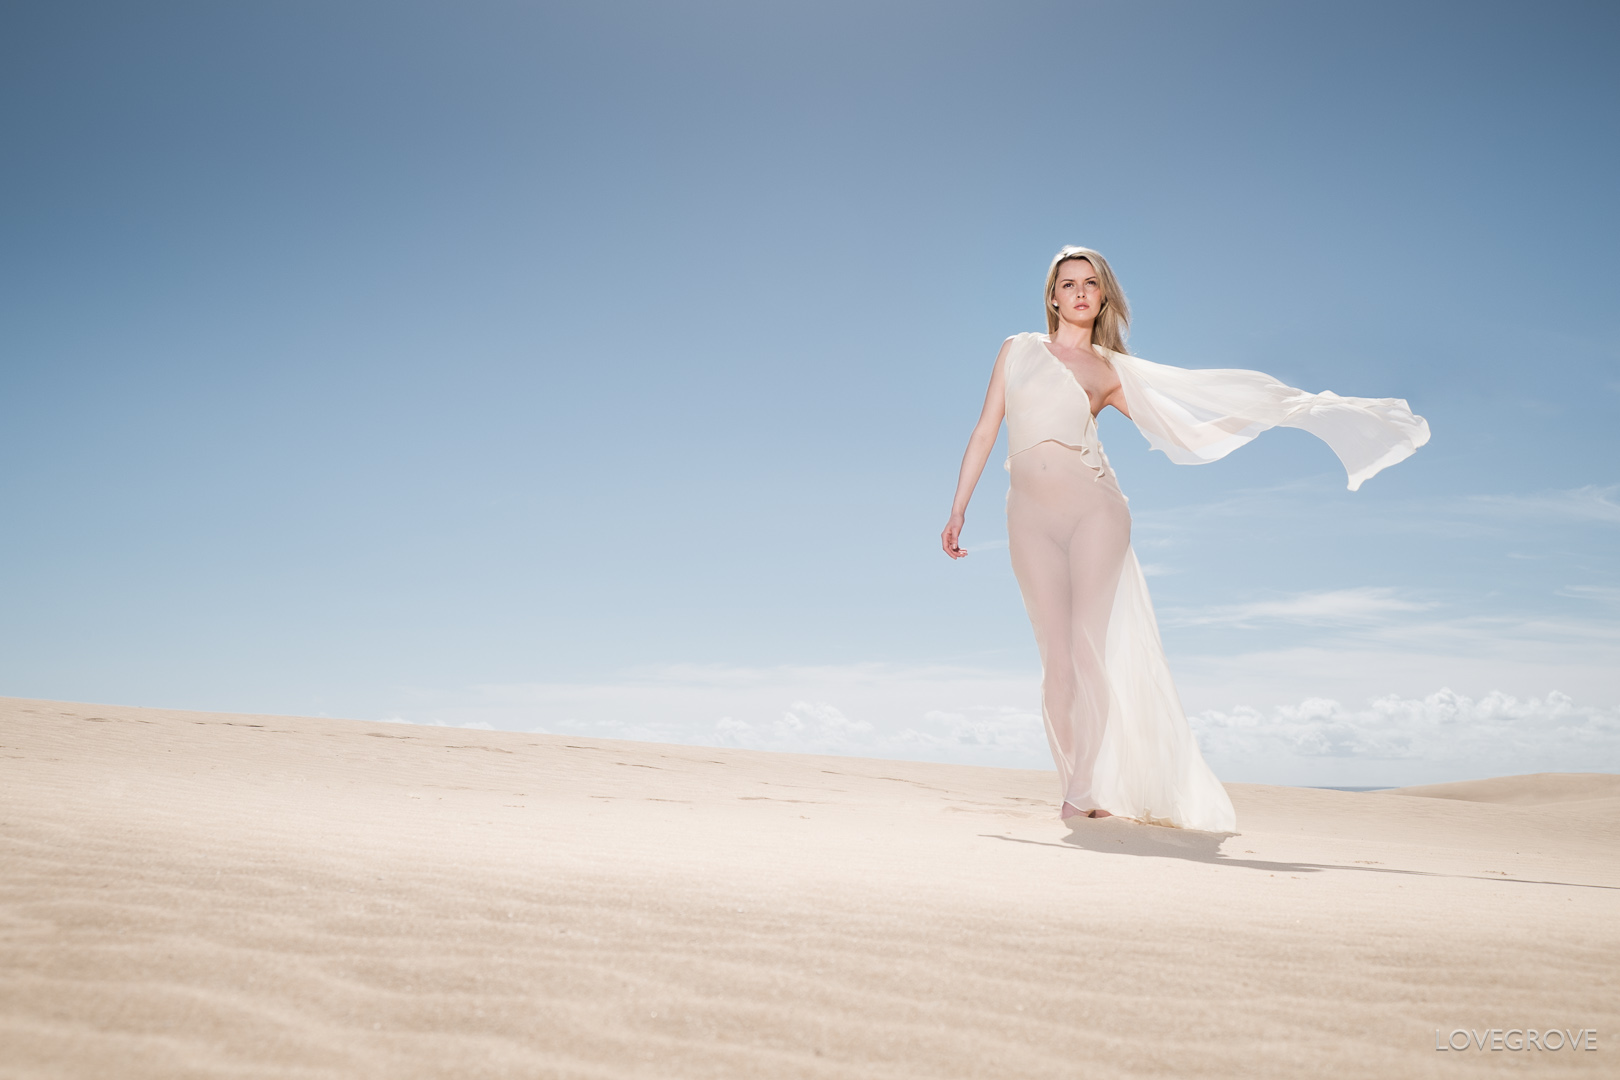 Carla Monaco on the sand dunes of Fuerteventura in a silk chiffon dress designed and comissioned by Damien Lovegrove and made by Lisa Keating